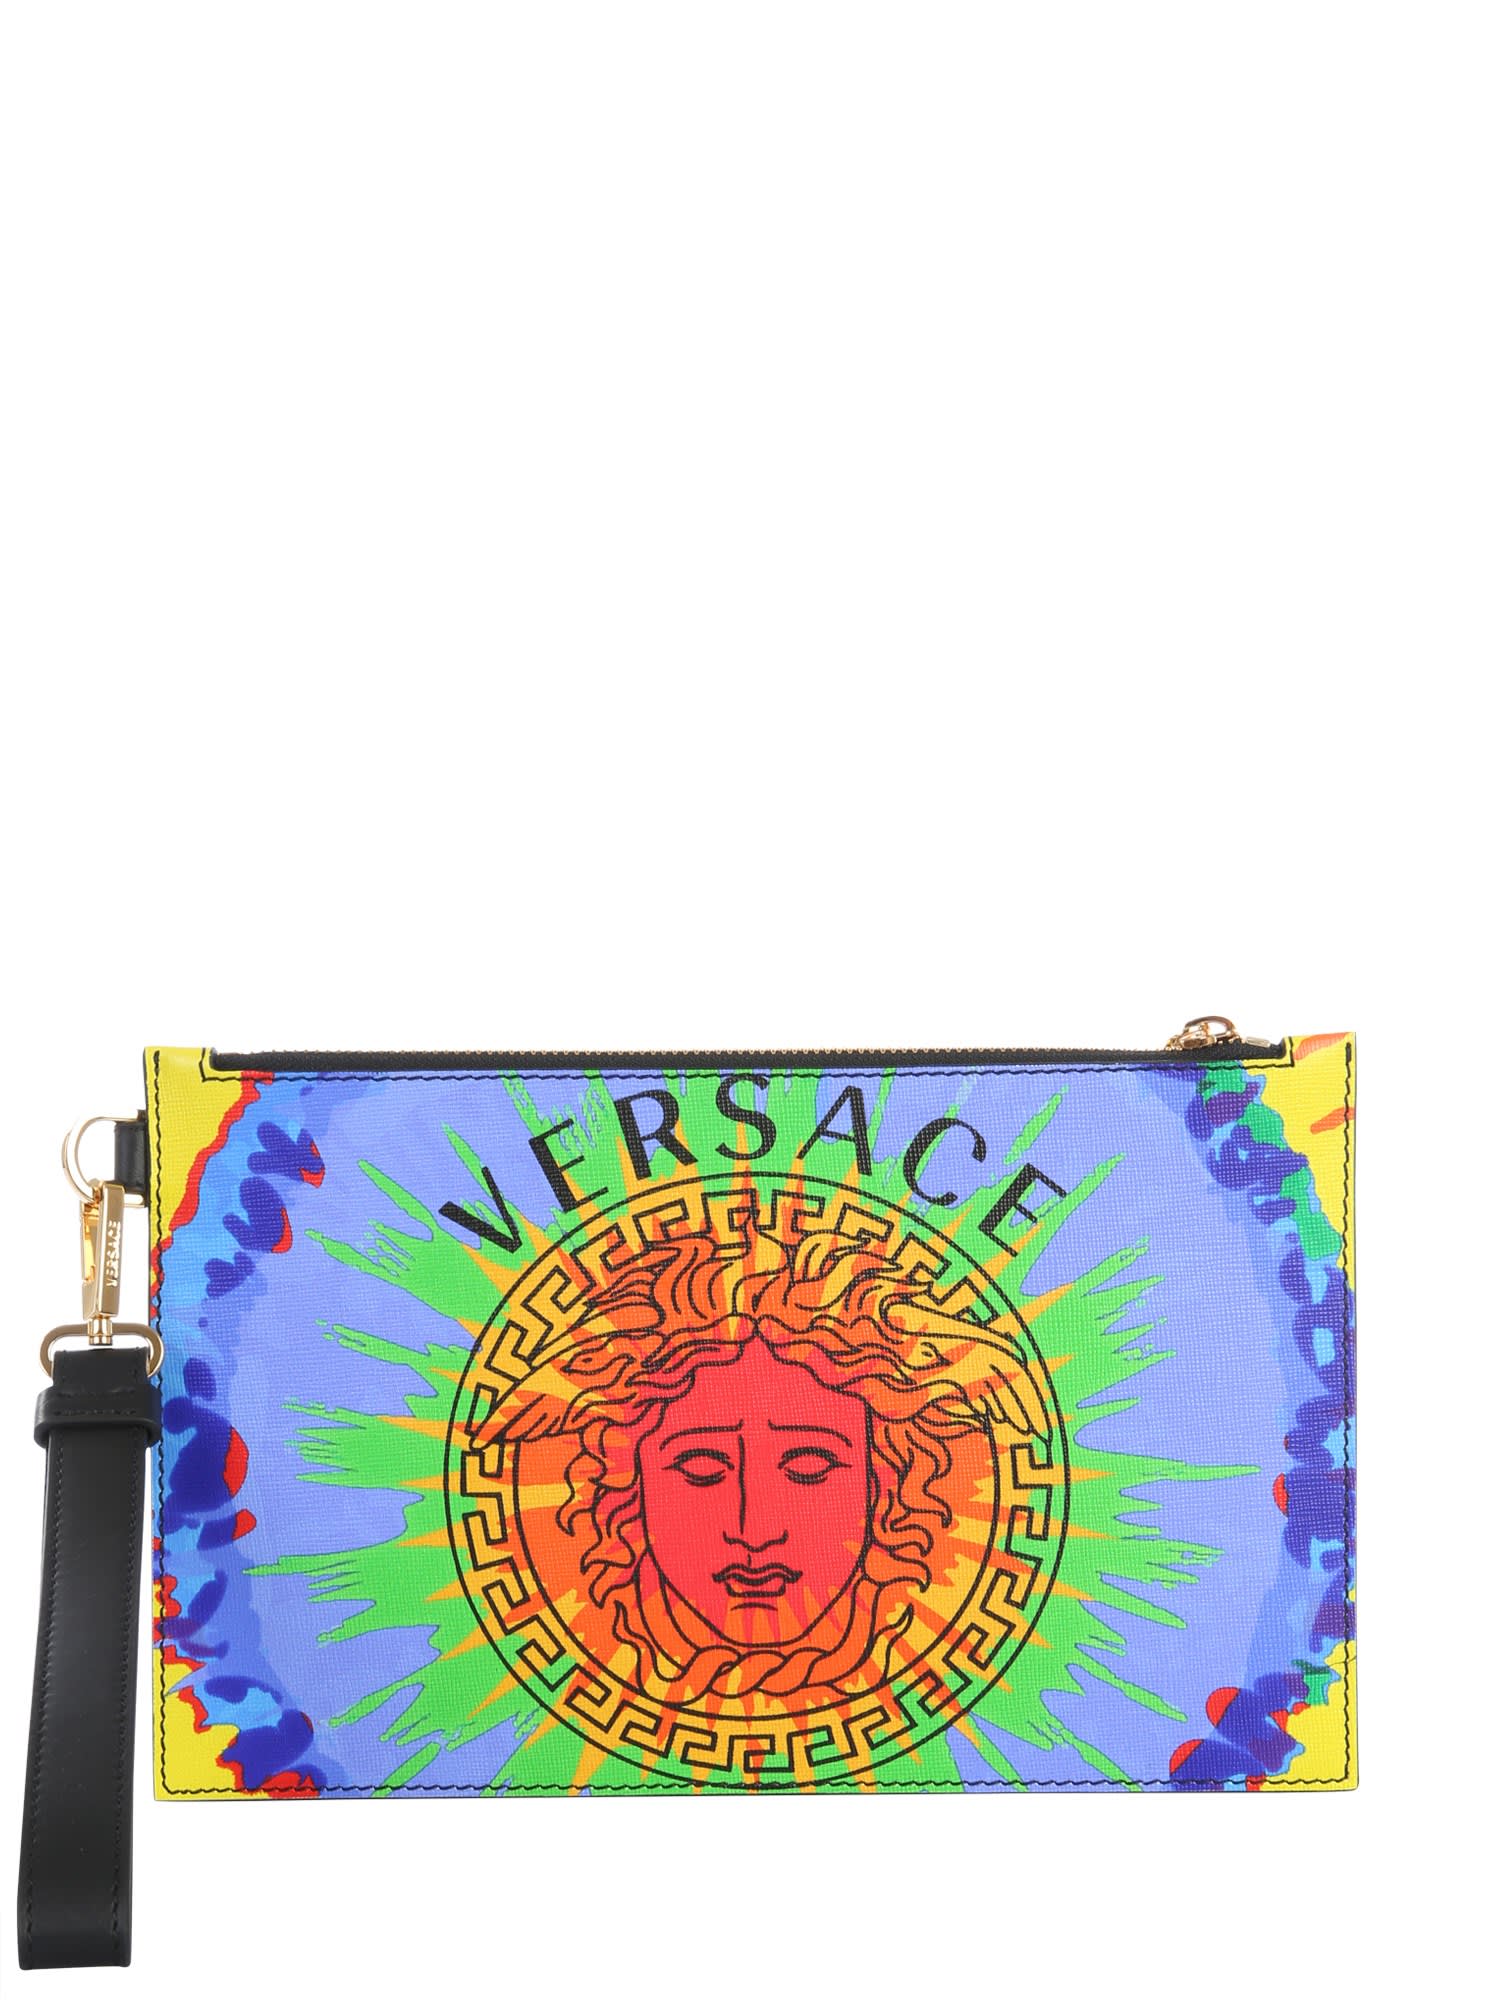 VERSACE POUCH WITH LOGO,11257277